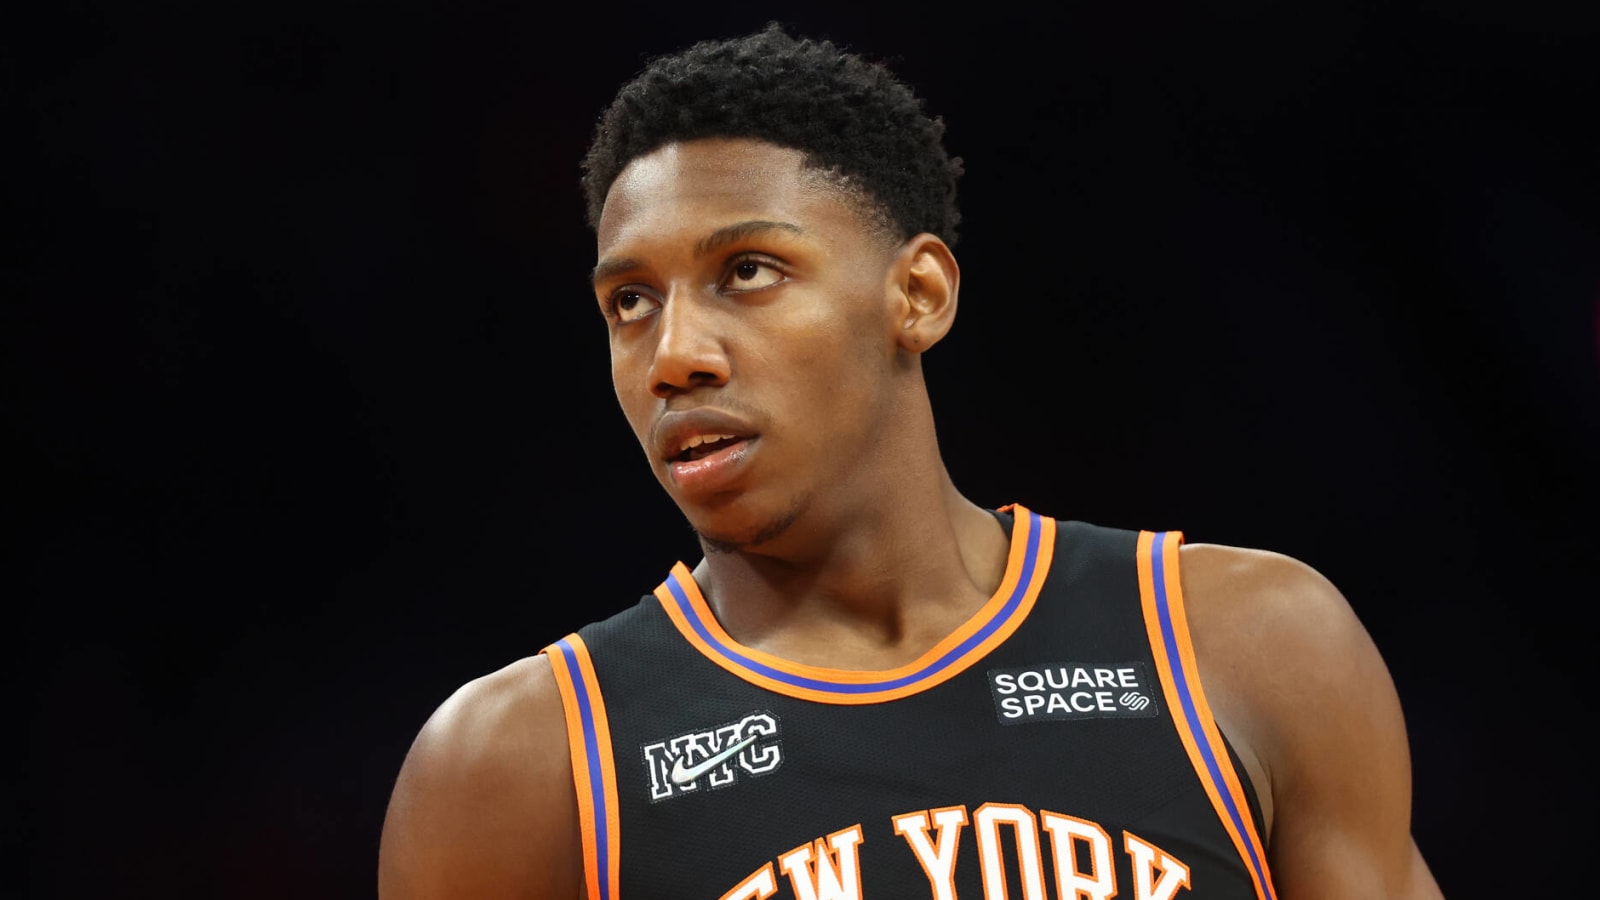 RJ Barrett hasn't been 'ruled out' of Donovan Mitchell trade